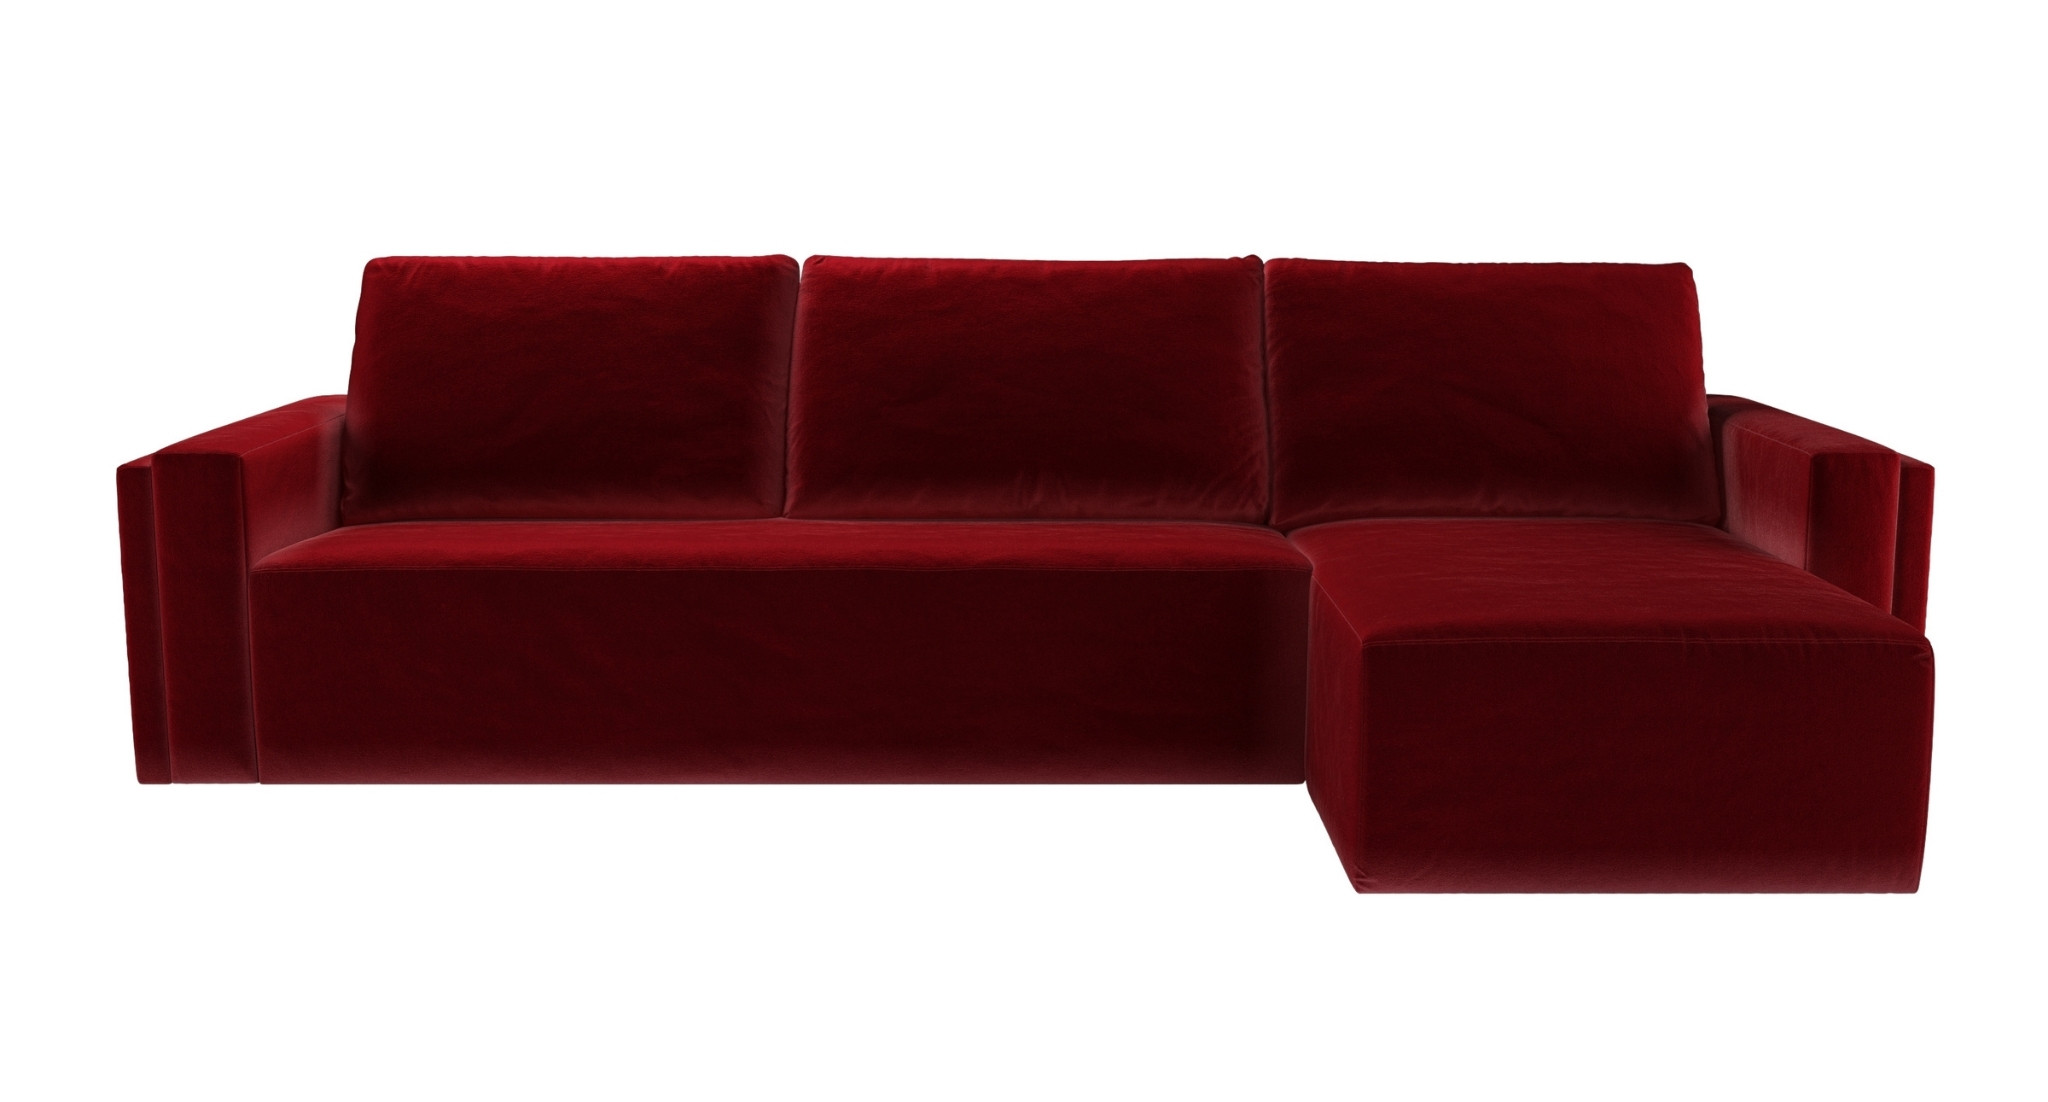 contemporary seating, Sofa.com Introduces New Seating Designs for Residential and Commercial Interior Design